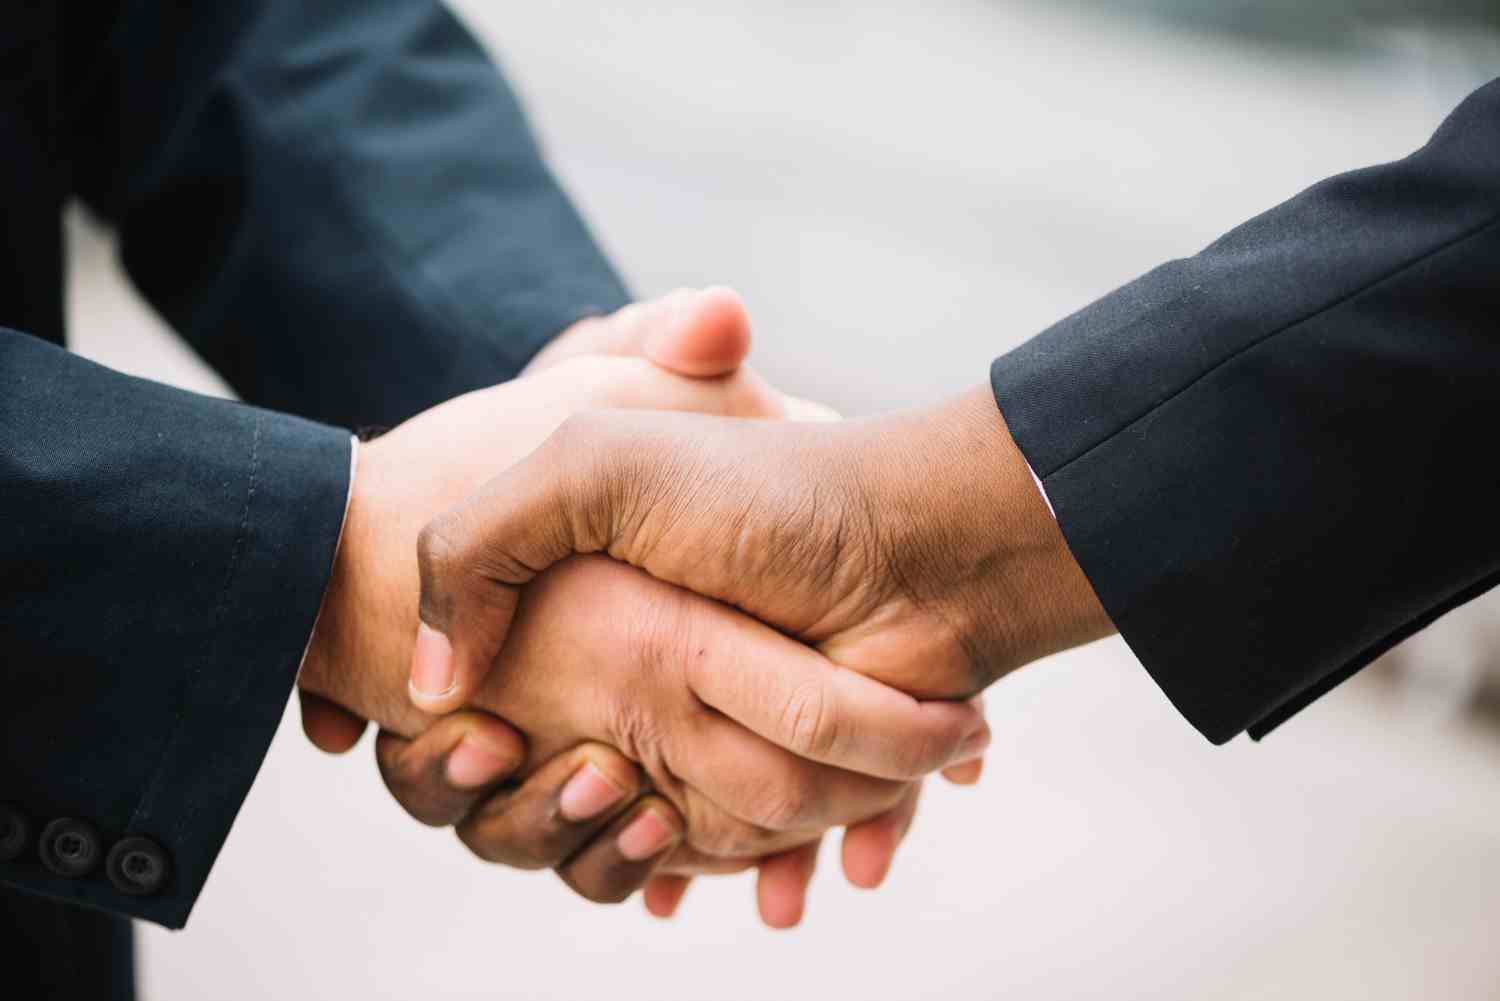 What the two-handed handshake means